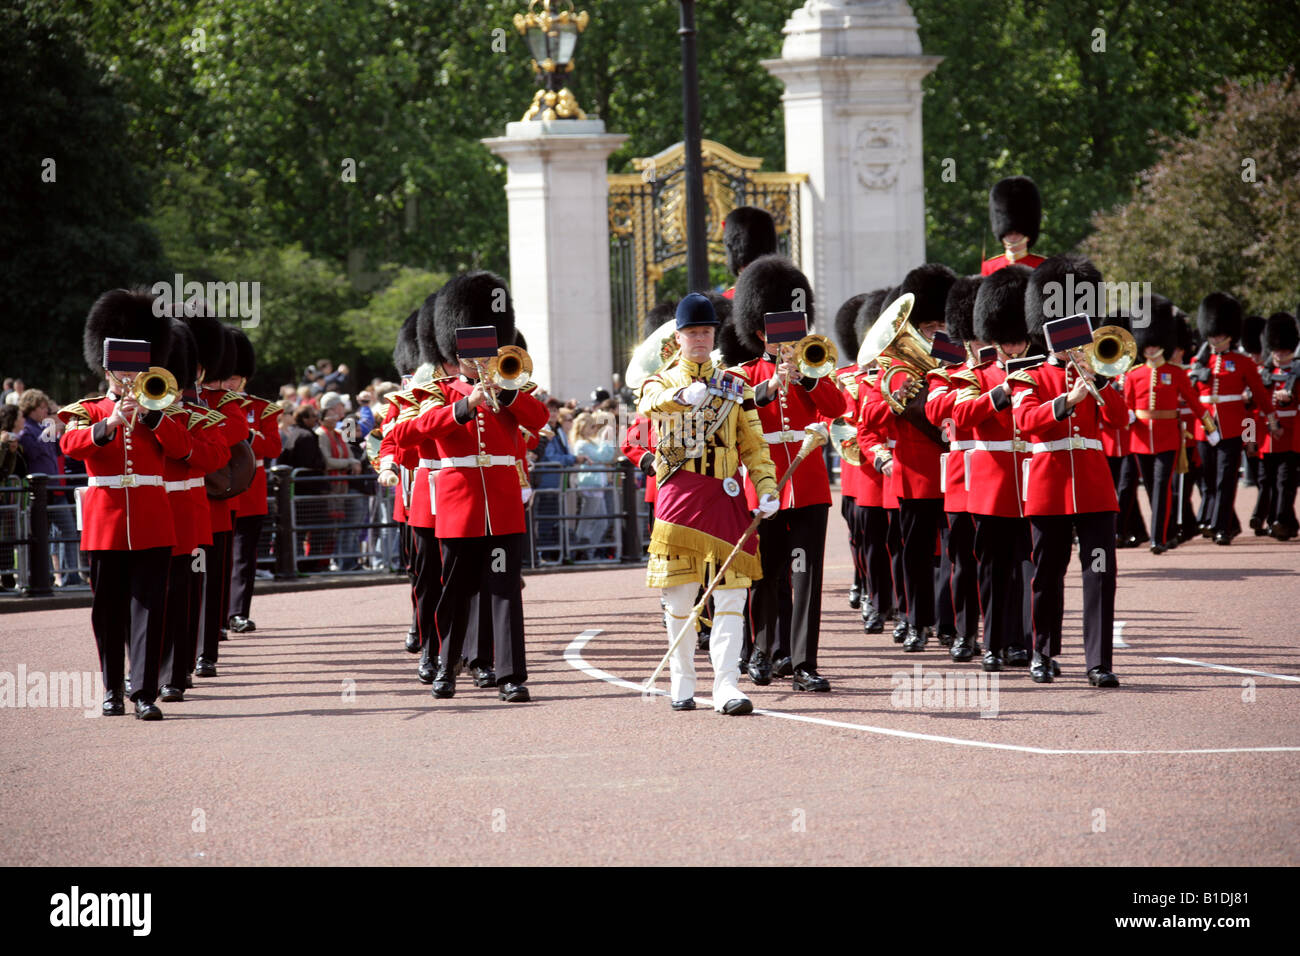 The Scots Guards Band Marching Past Buckingham Palace London Trooping the Colour Ceremony June 14th 2008 Stock Photo